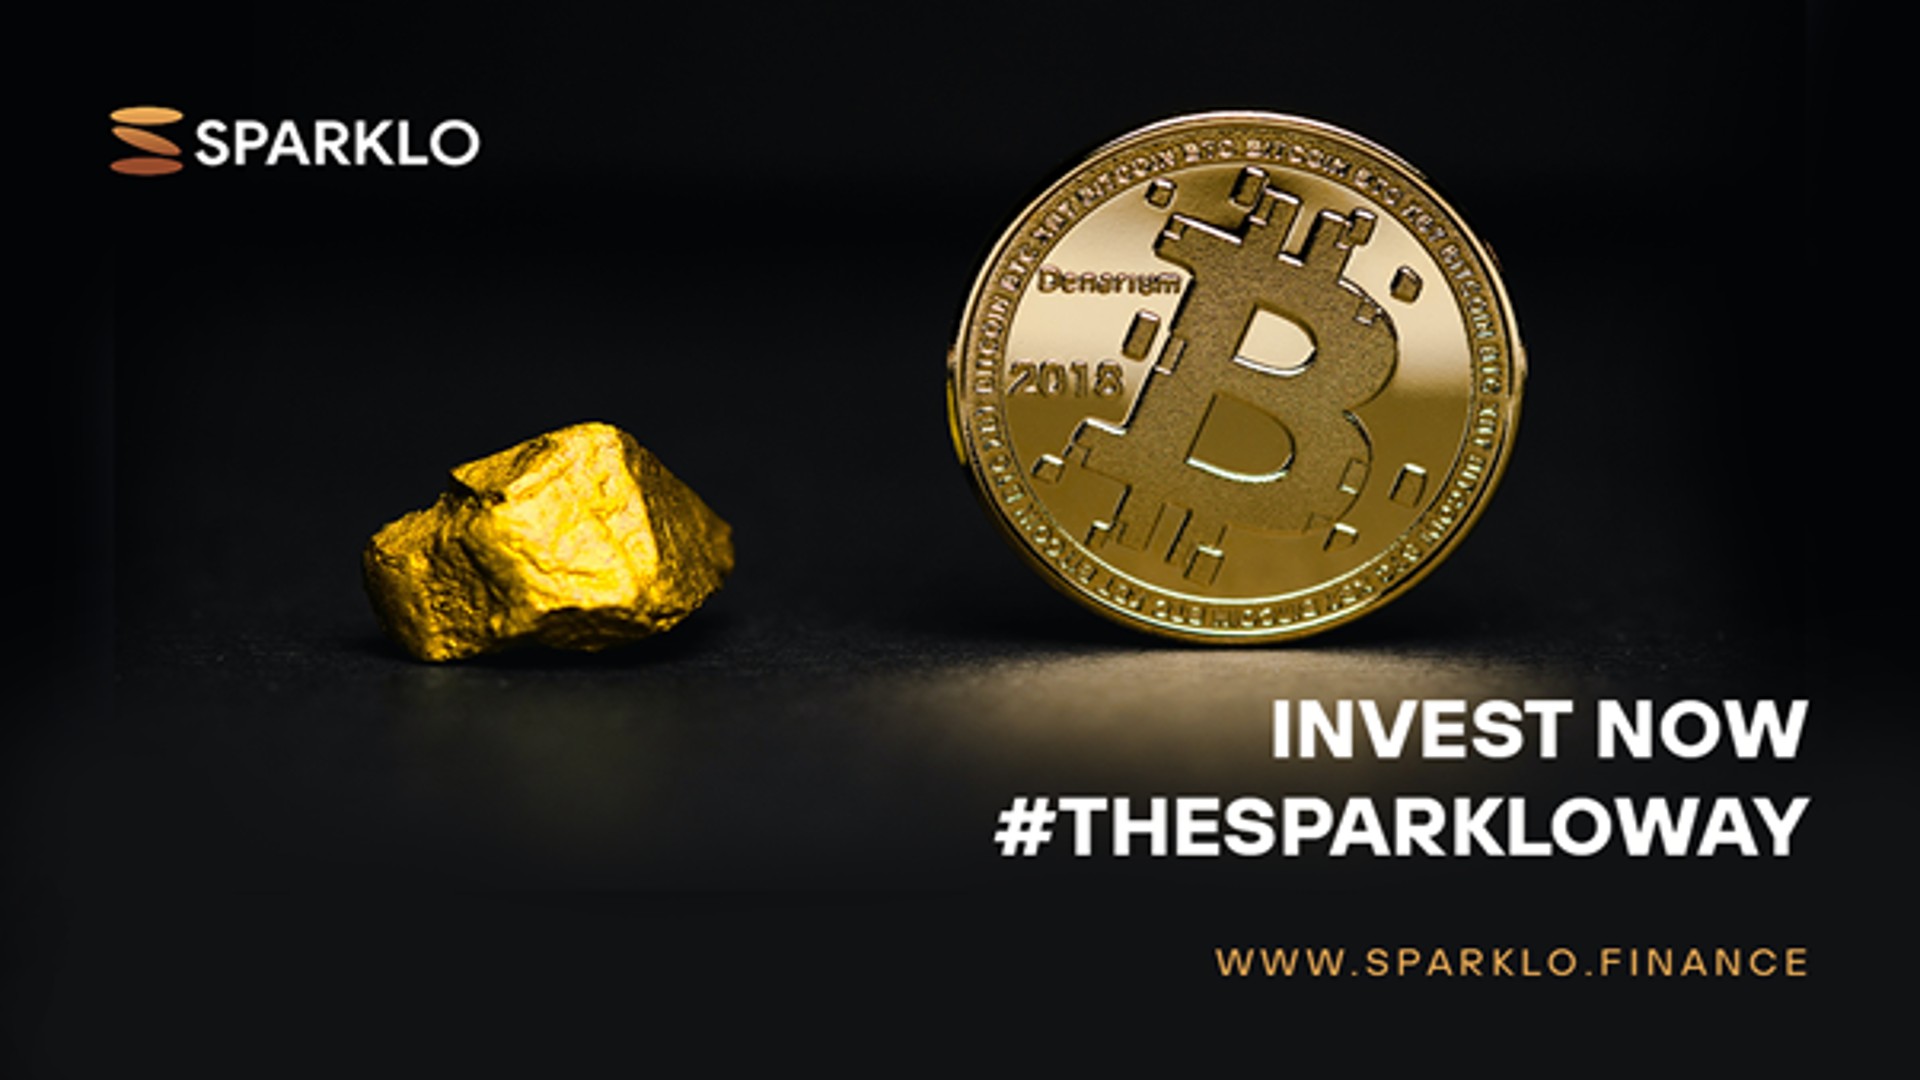 Sparklo’s Crypto Market Cap To Overtake Uniswap and Hedera: Here’s Why